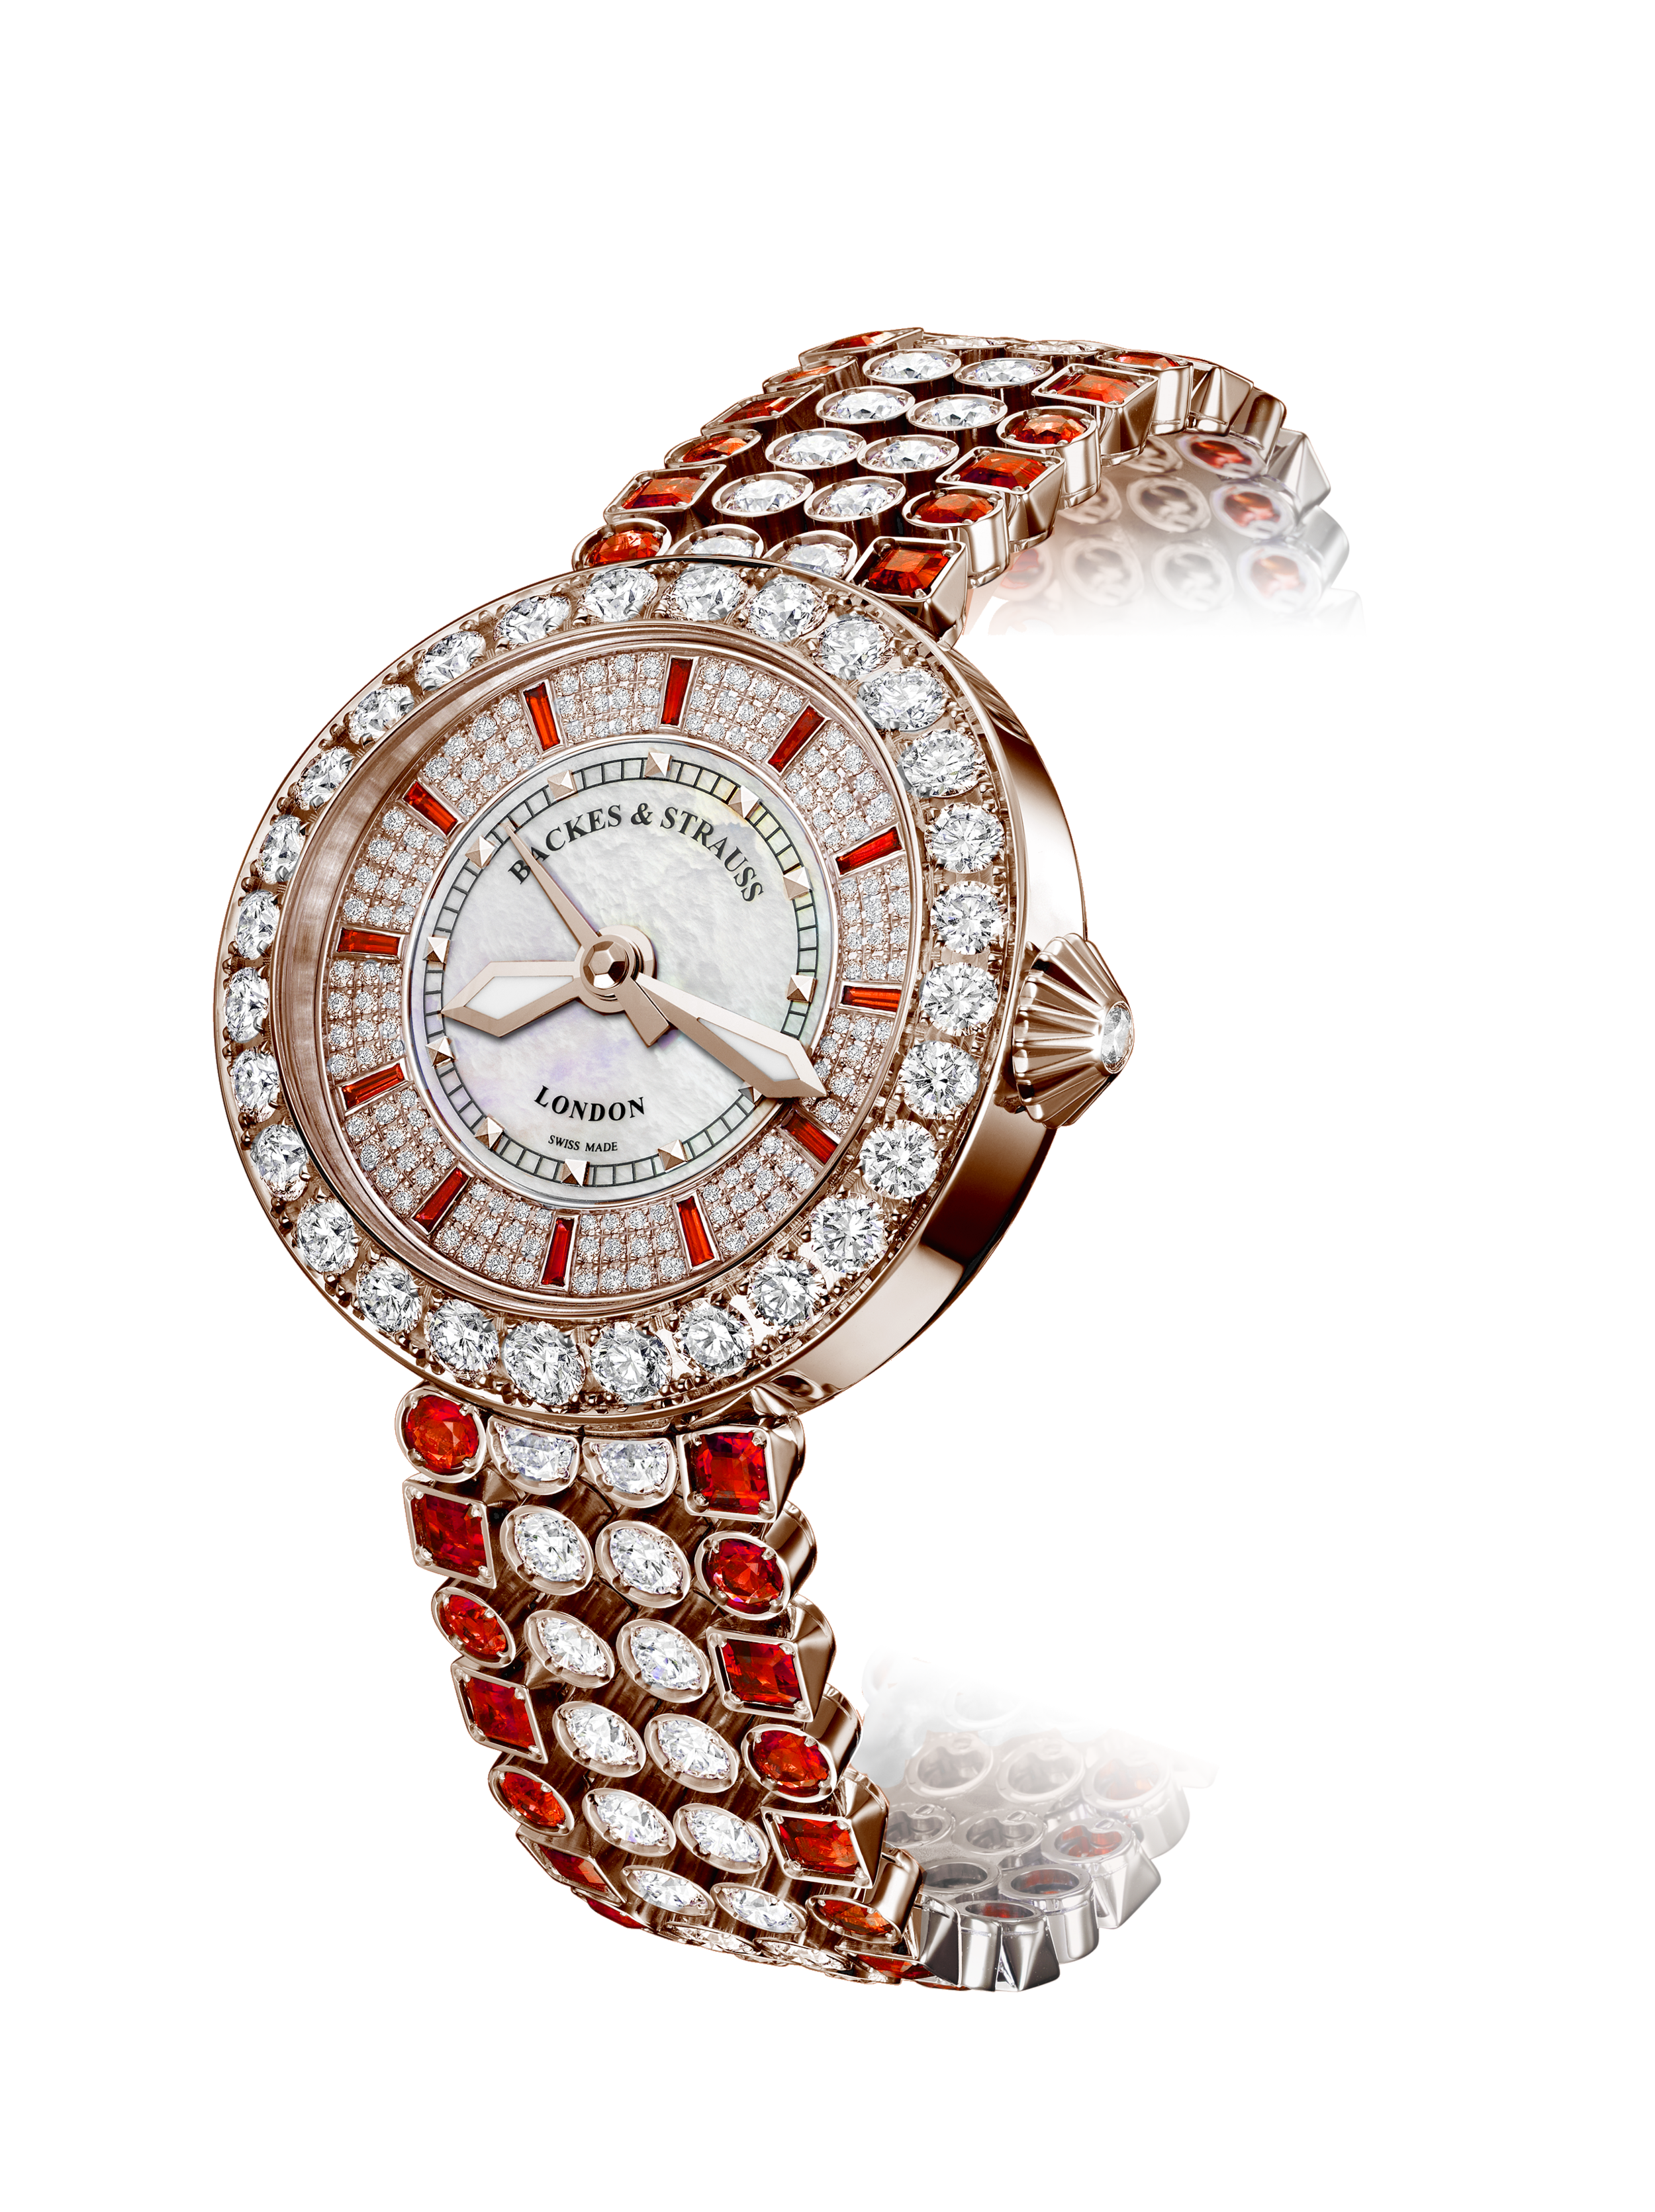 Piccadilly Princess 37 red rose diamond watch